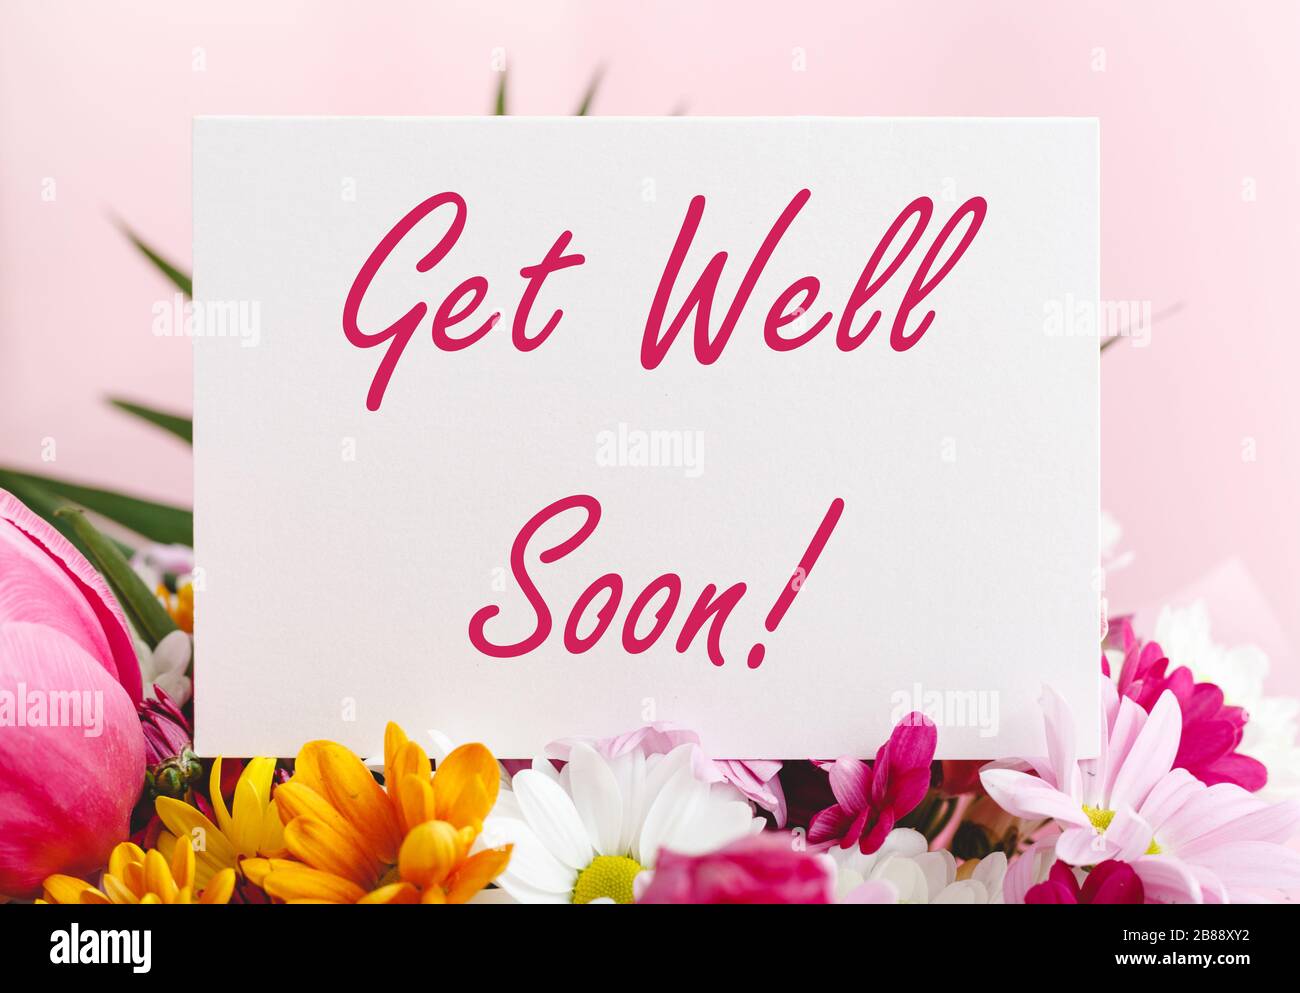 Get Well Soon card in flower bouquet on pink background. Stock photo mock up for text. Stock Photo